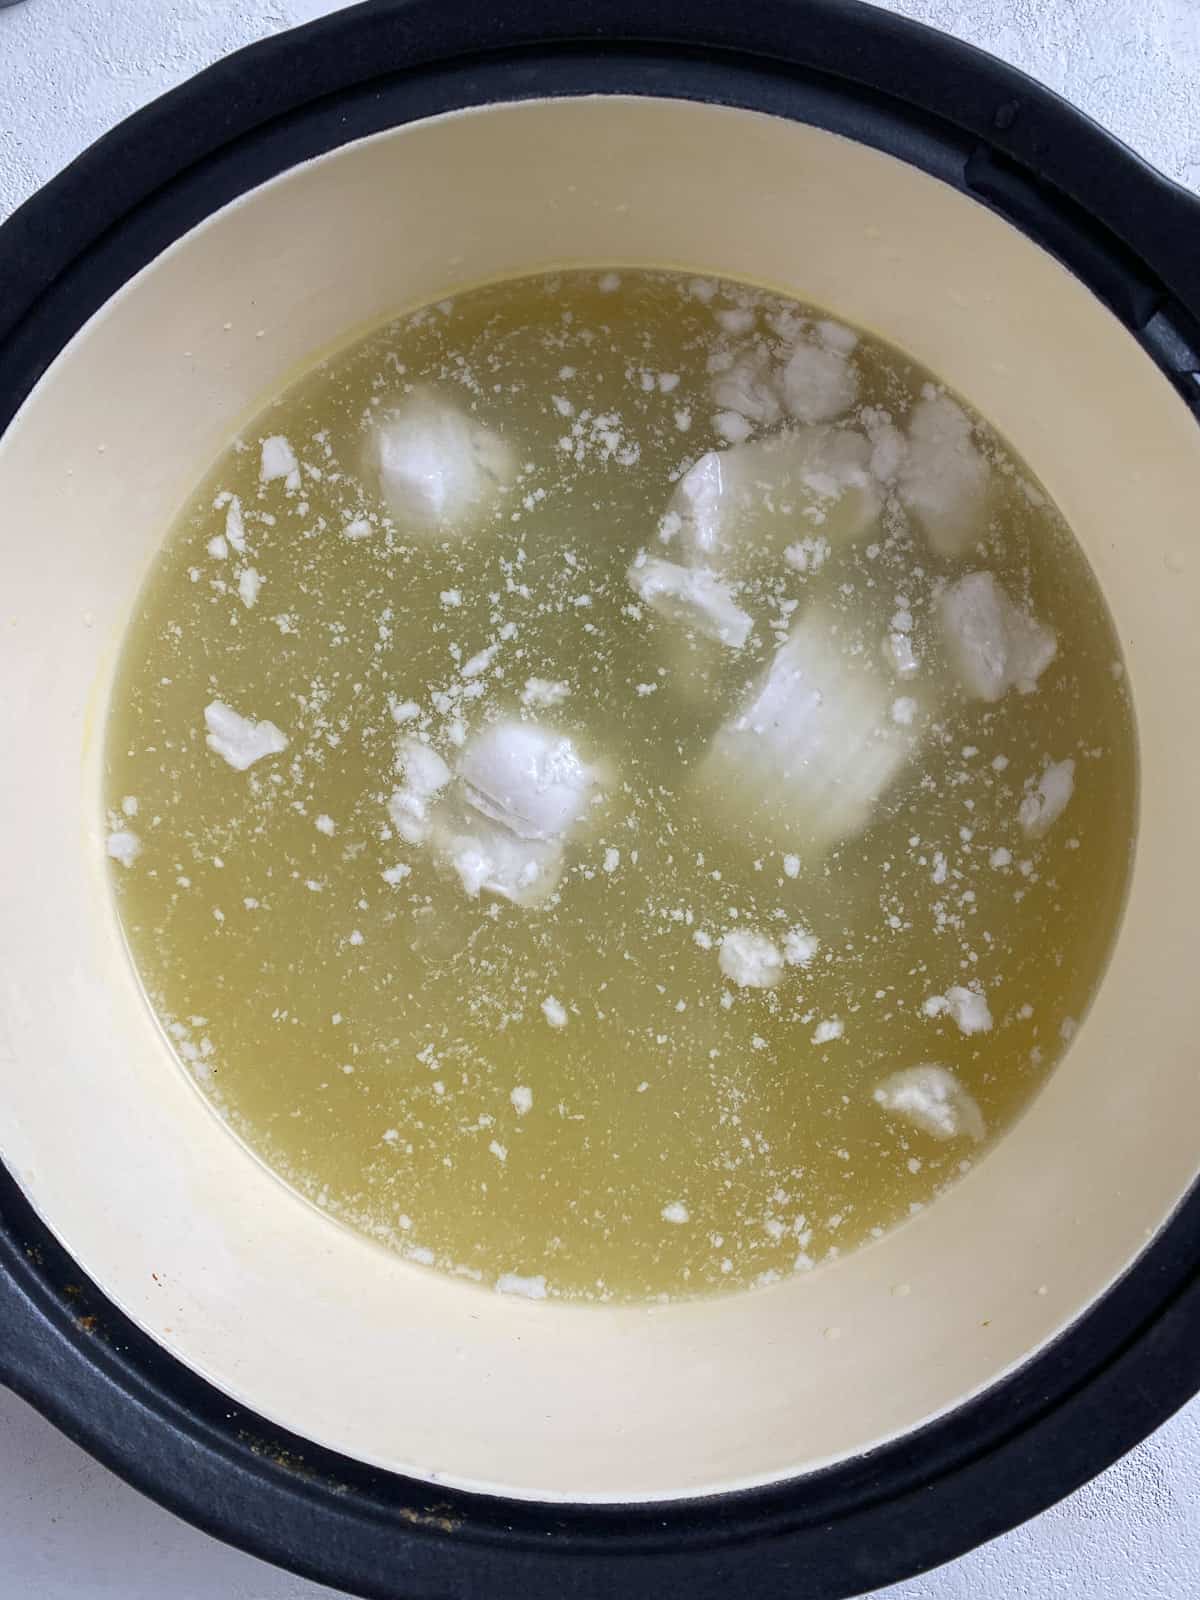 process of veggie broth and coconut milk in a pan